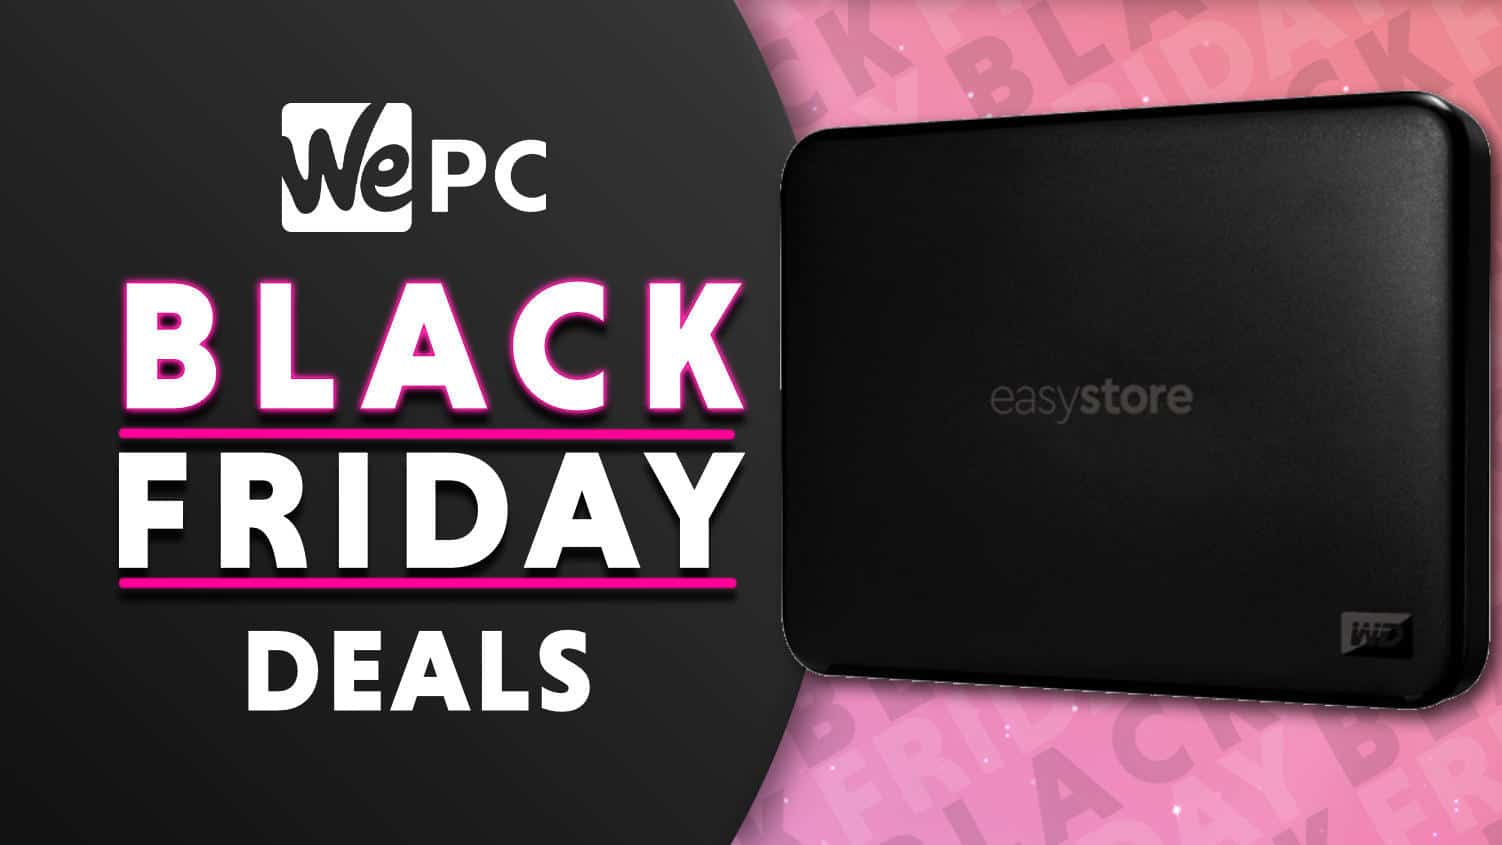 Save 47% on a 1TB Portable HDD early Black Friday 2021 deals